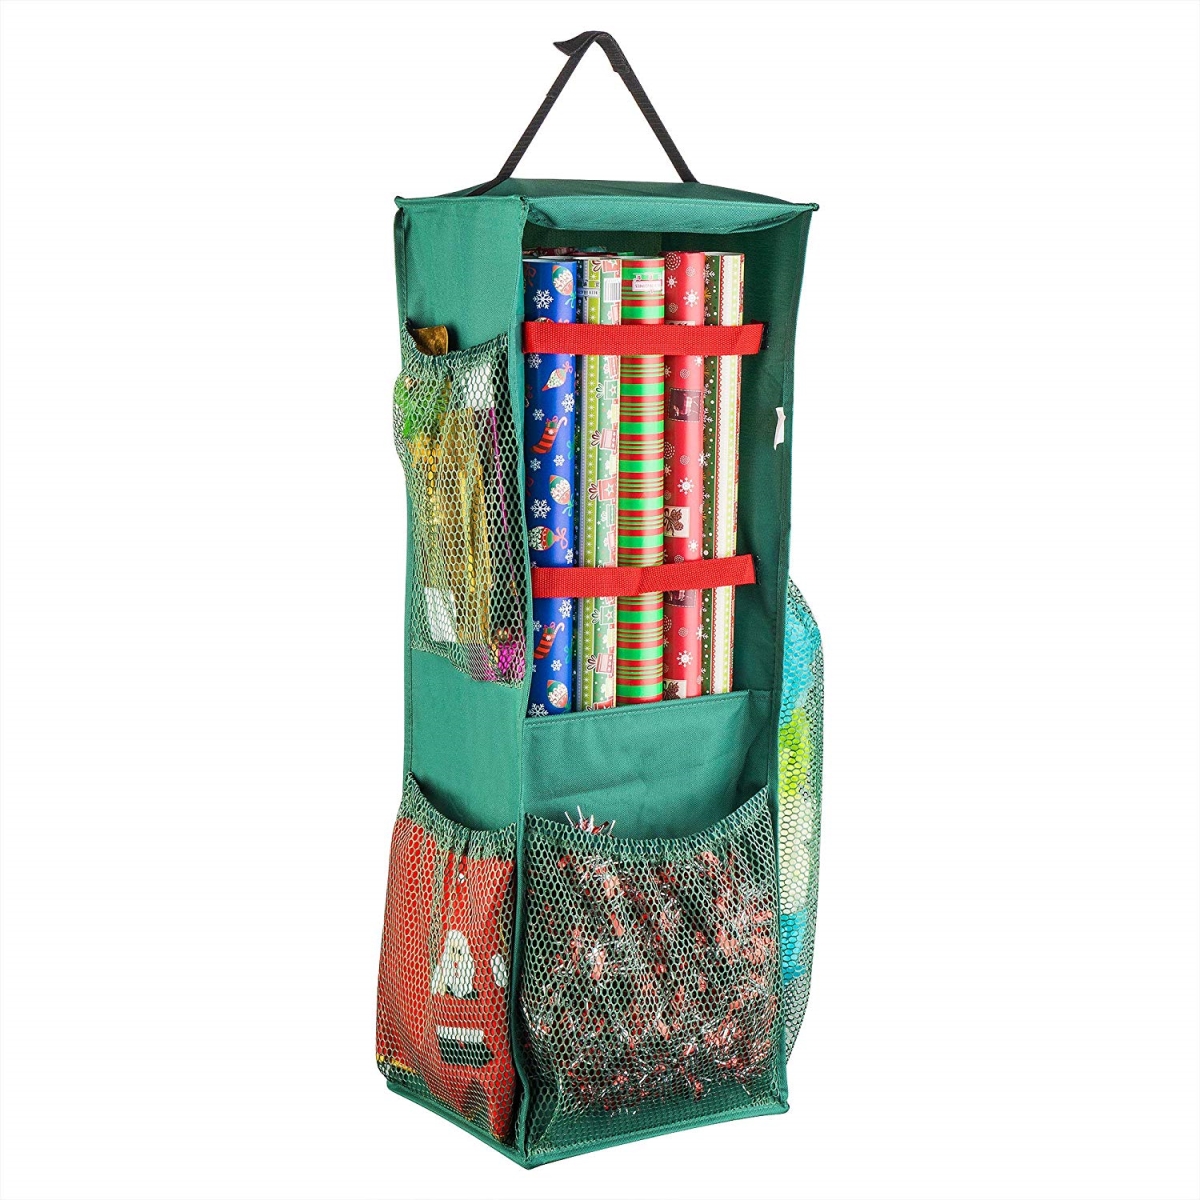 83-dt5572 Four Sided Hanging Gift Wrap & Bag Storage & Organizer - Twin Green